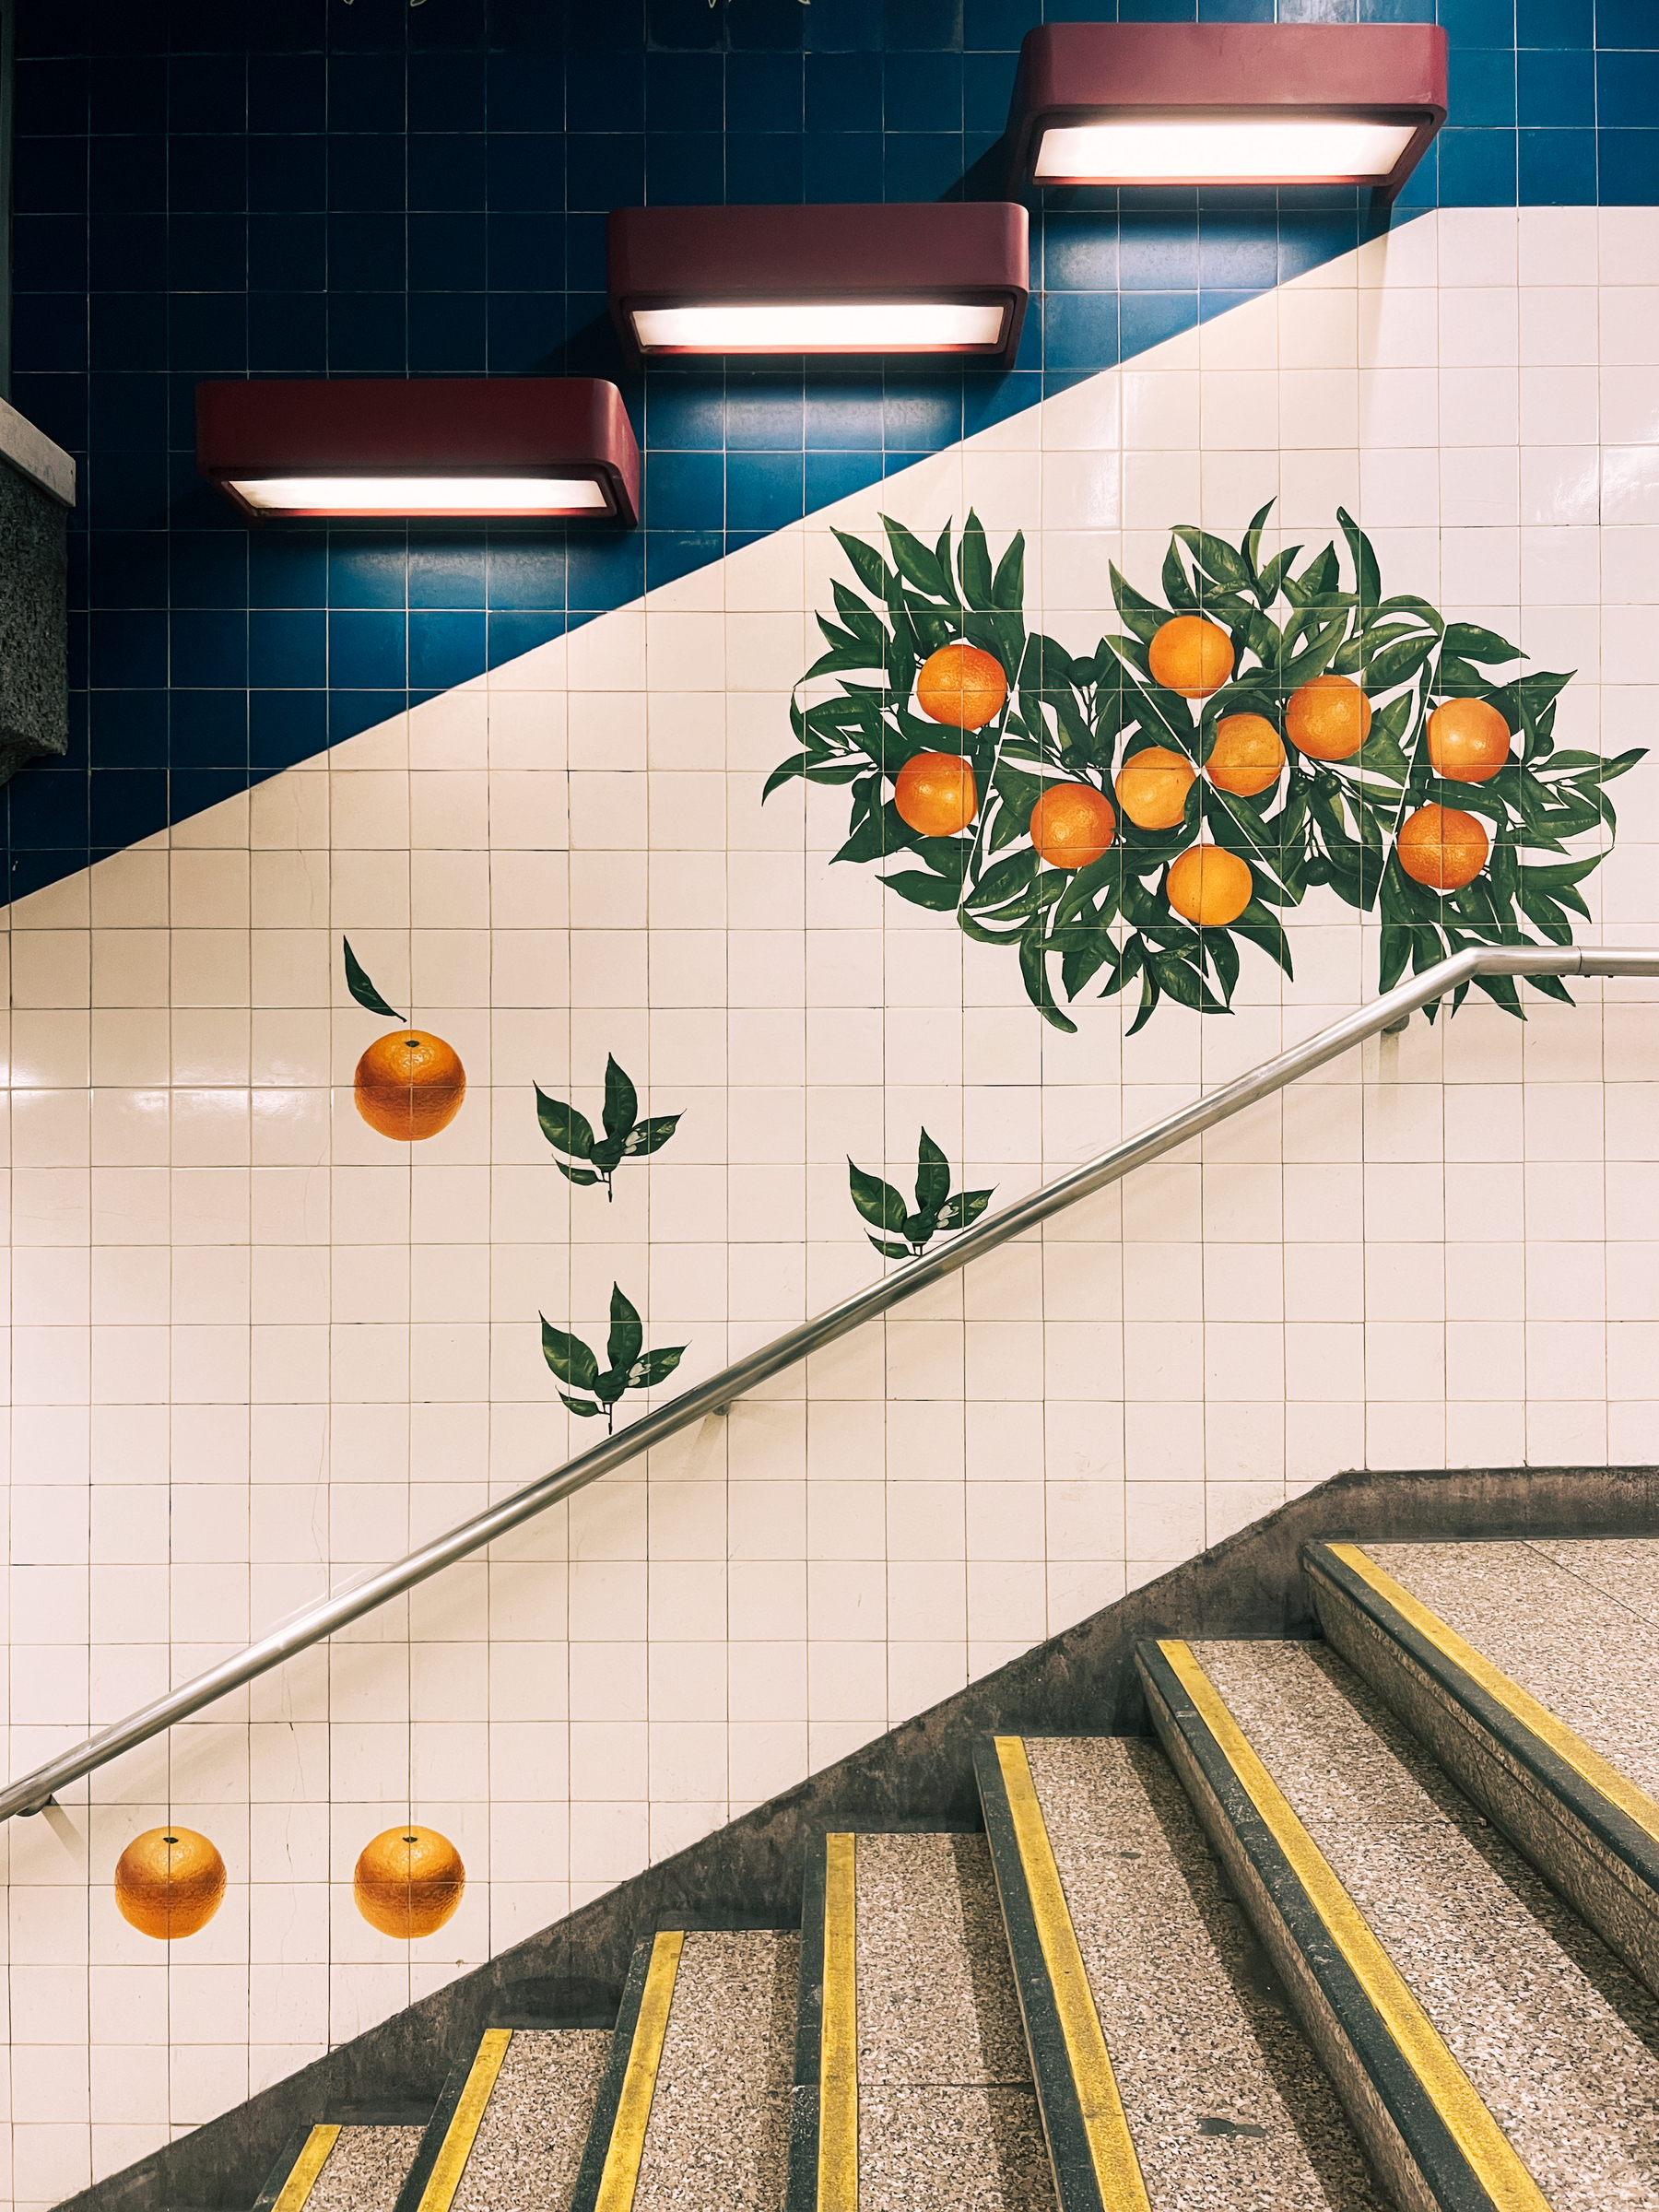 Stairway with oranges painted on tiles.